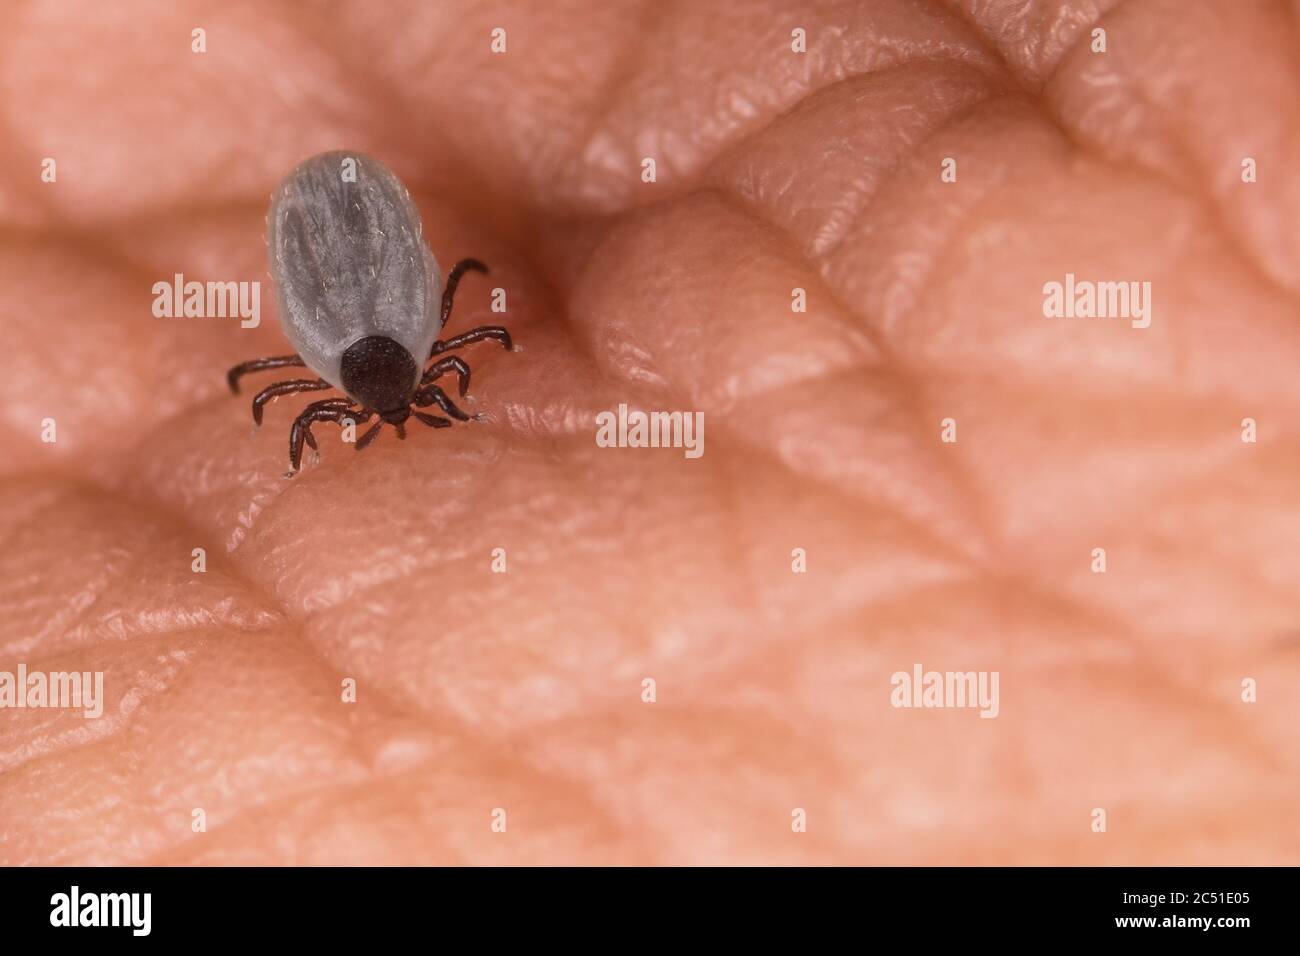 Biting castor bean tick with hypostom penetrating a skin and outstretched palps. Ixodes ricinus. Small female parasitic mite piercing human epidermis. Stock Photo